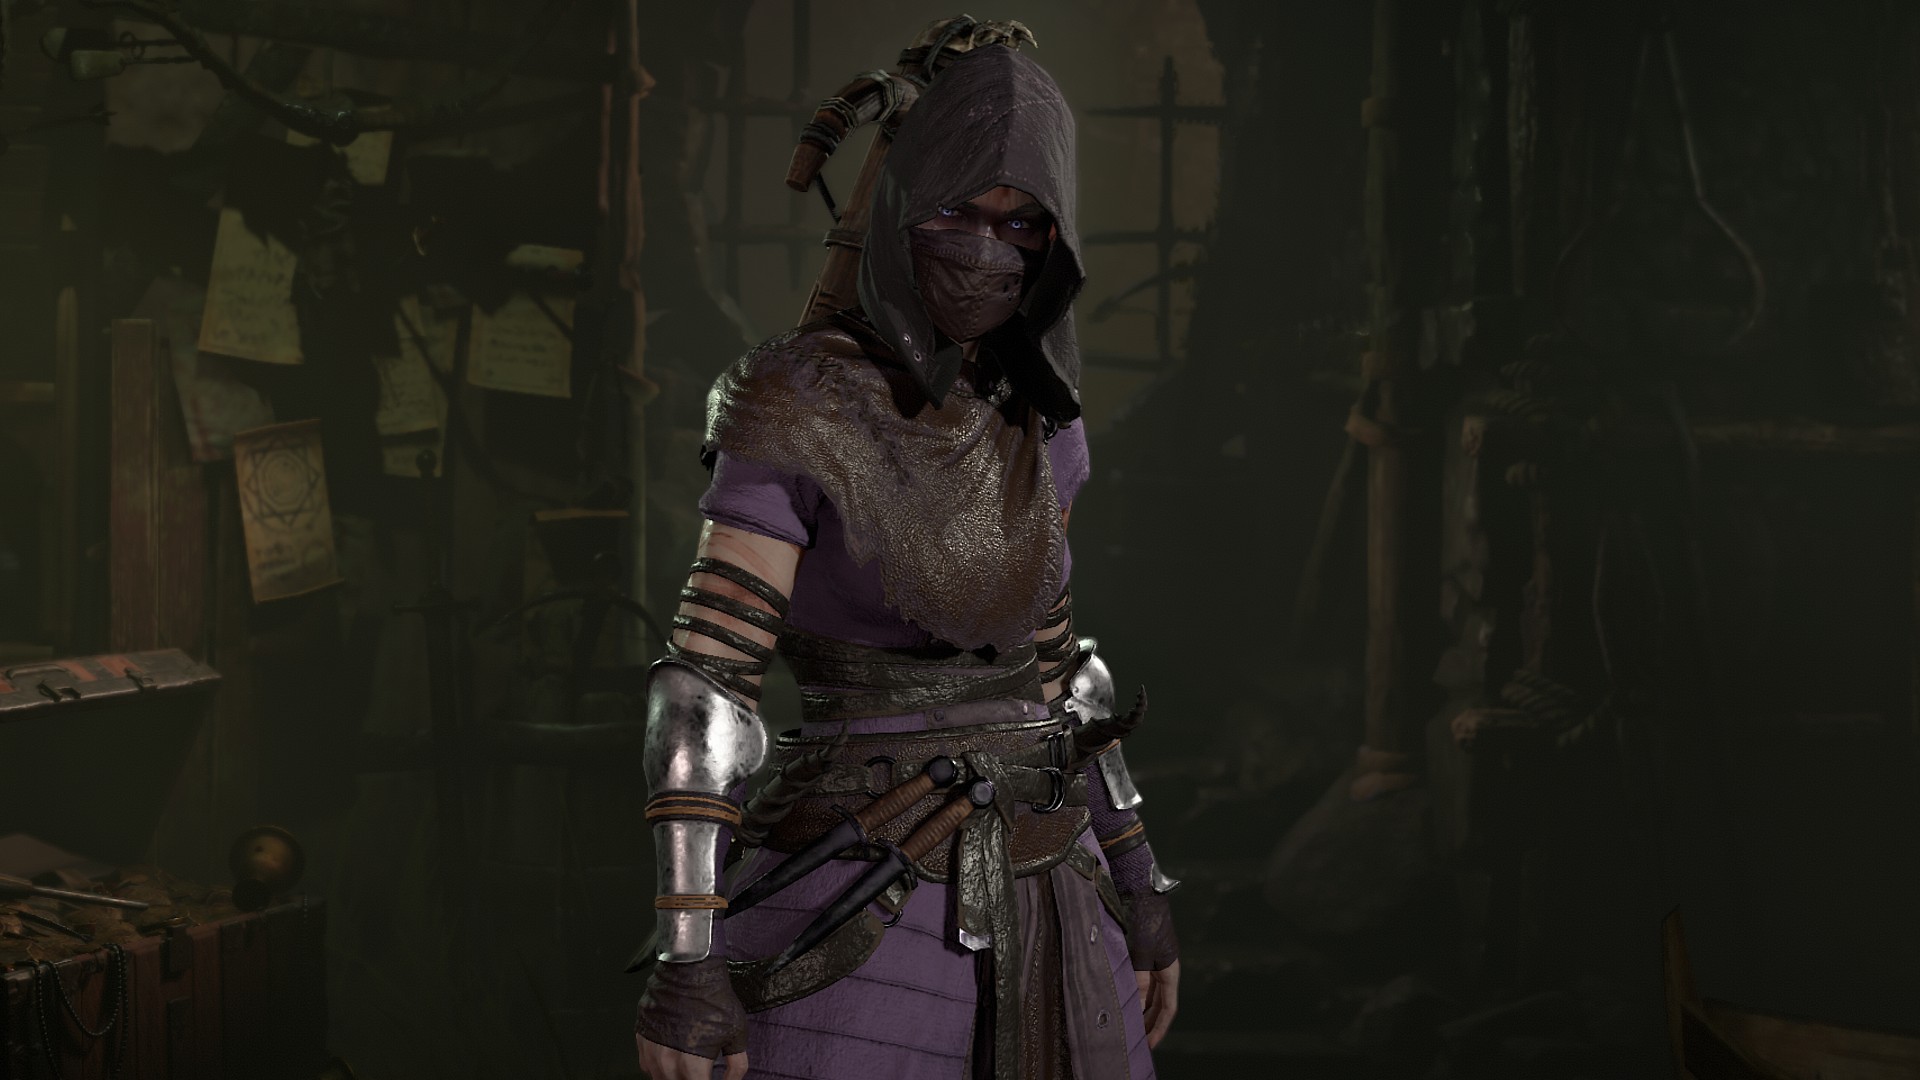 Diablo 4 class: A woman wearing a hood that covers her face, as well as a black mask with purple cloth armour and a belt around her waist in a shadowy dungeon room